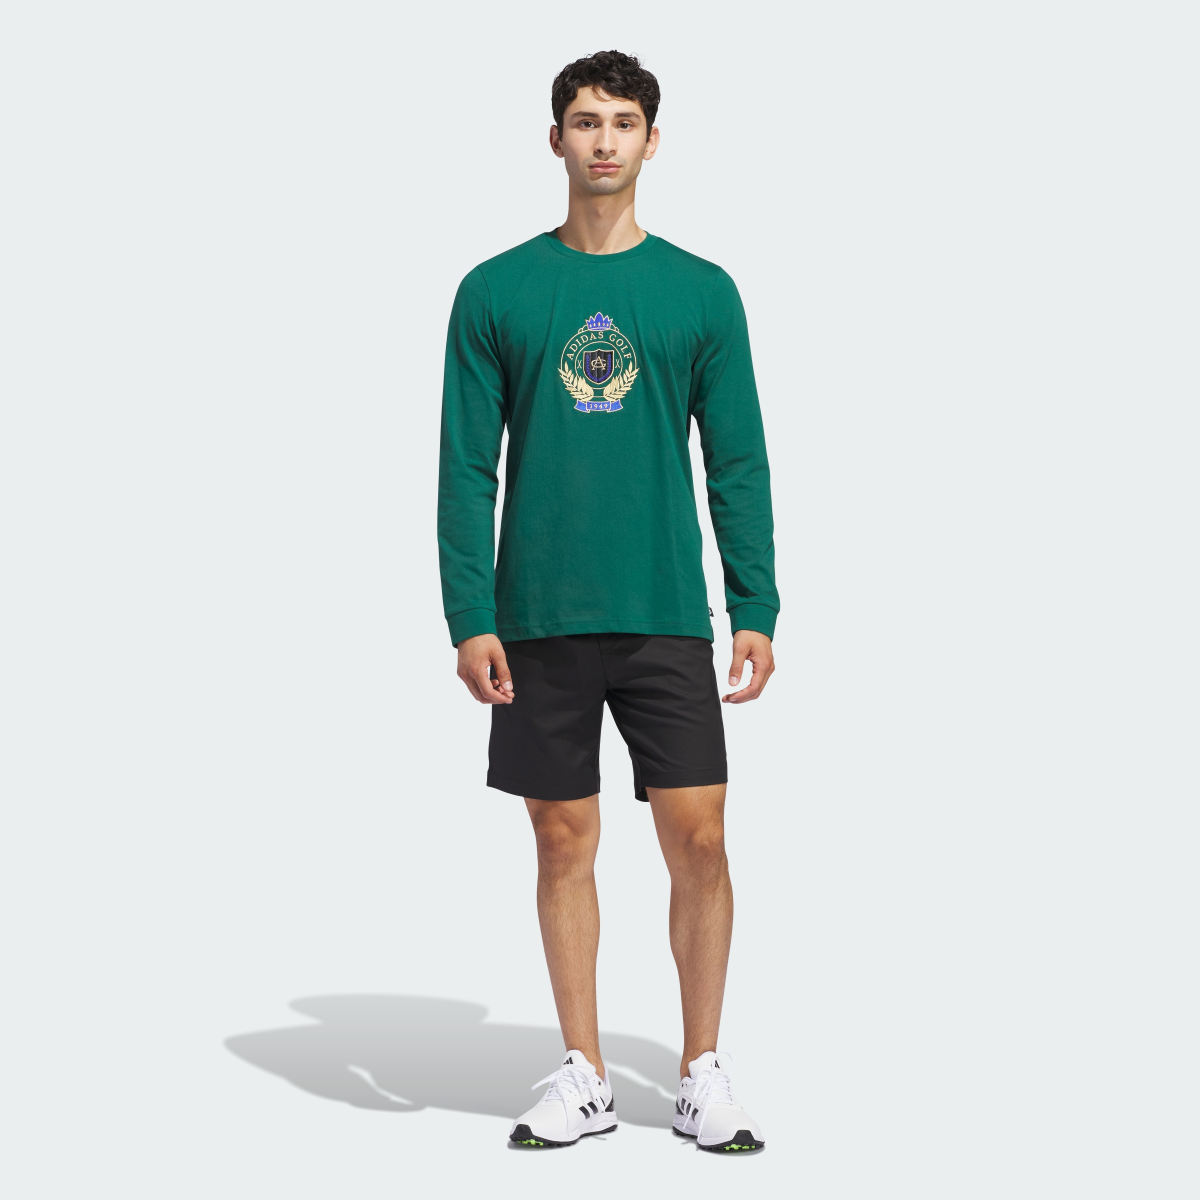 Adidas Go-To Crest Graphic Longsleeve. 8